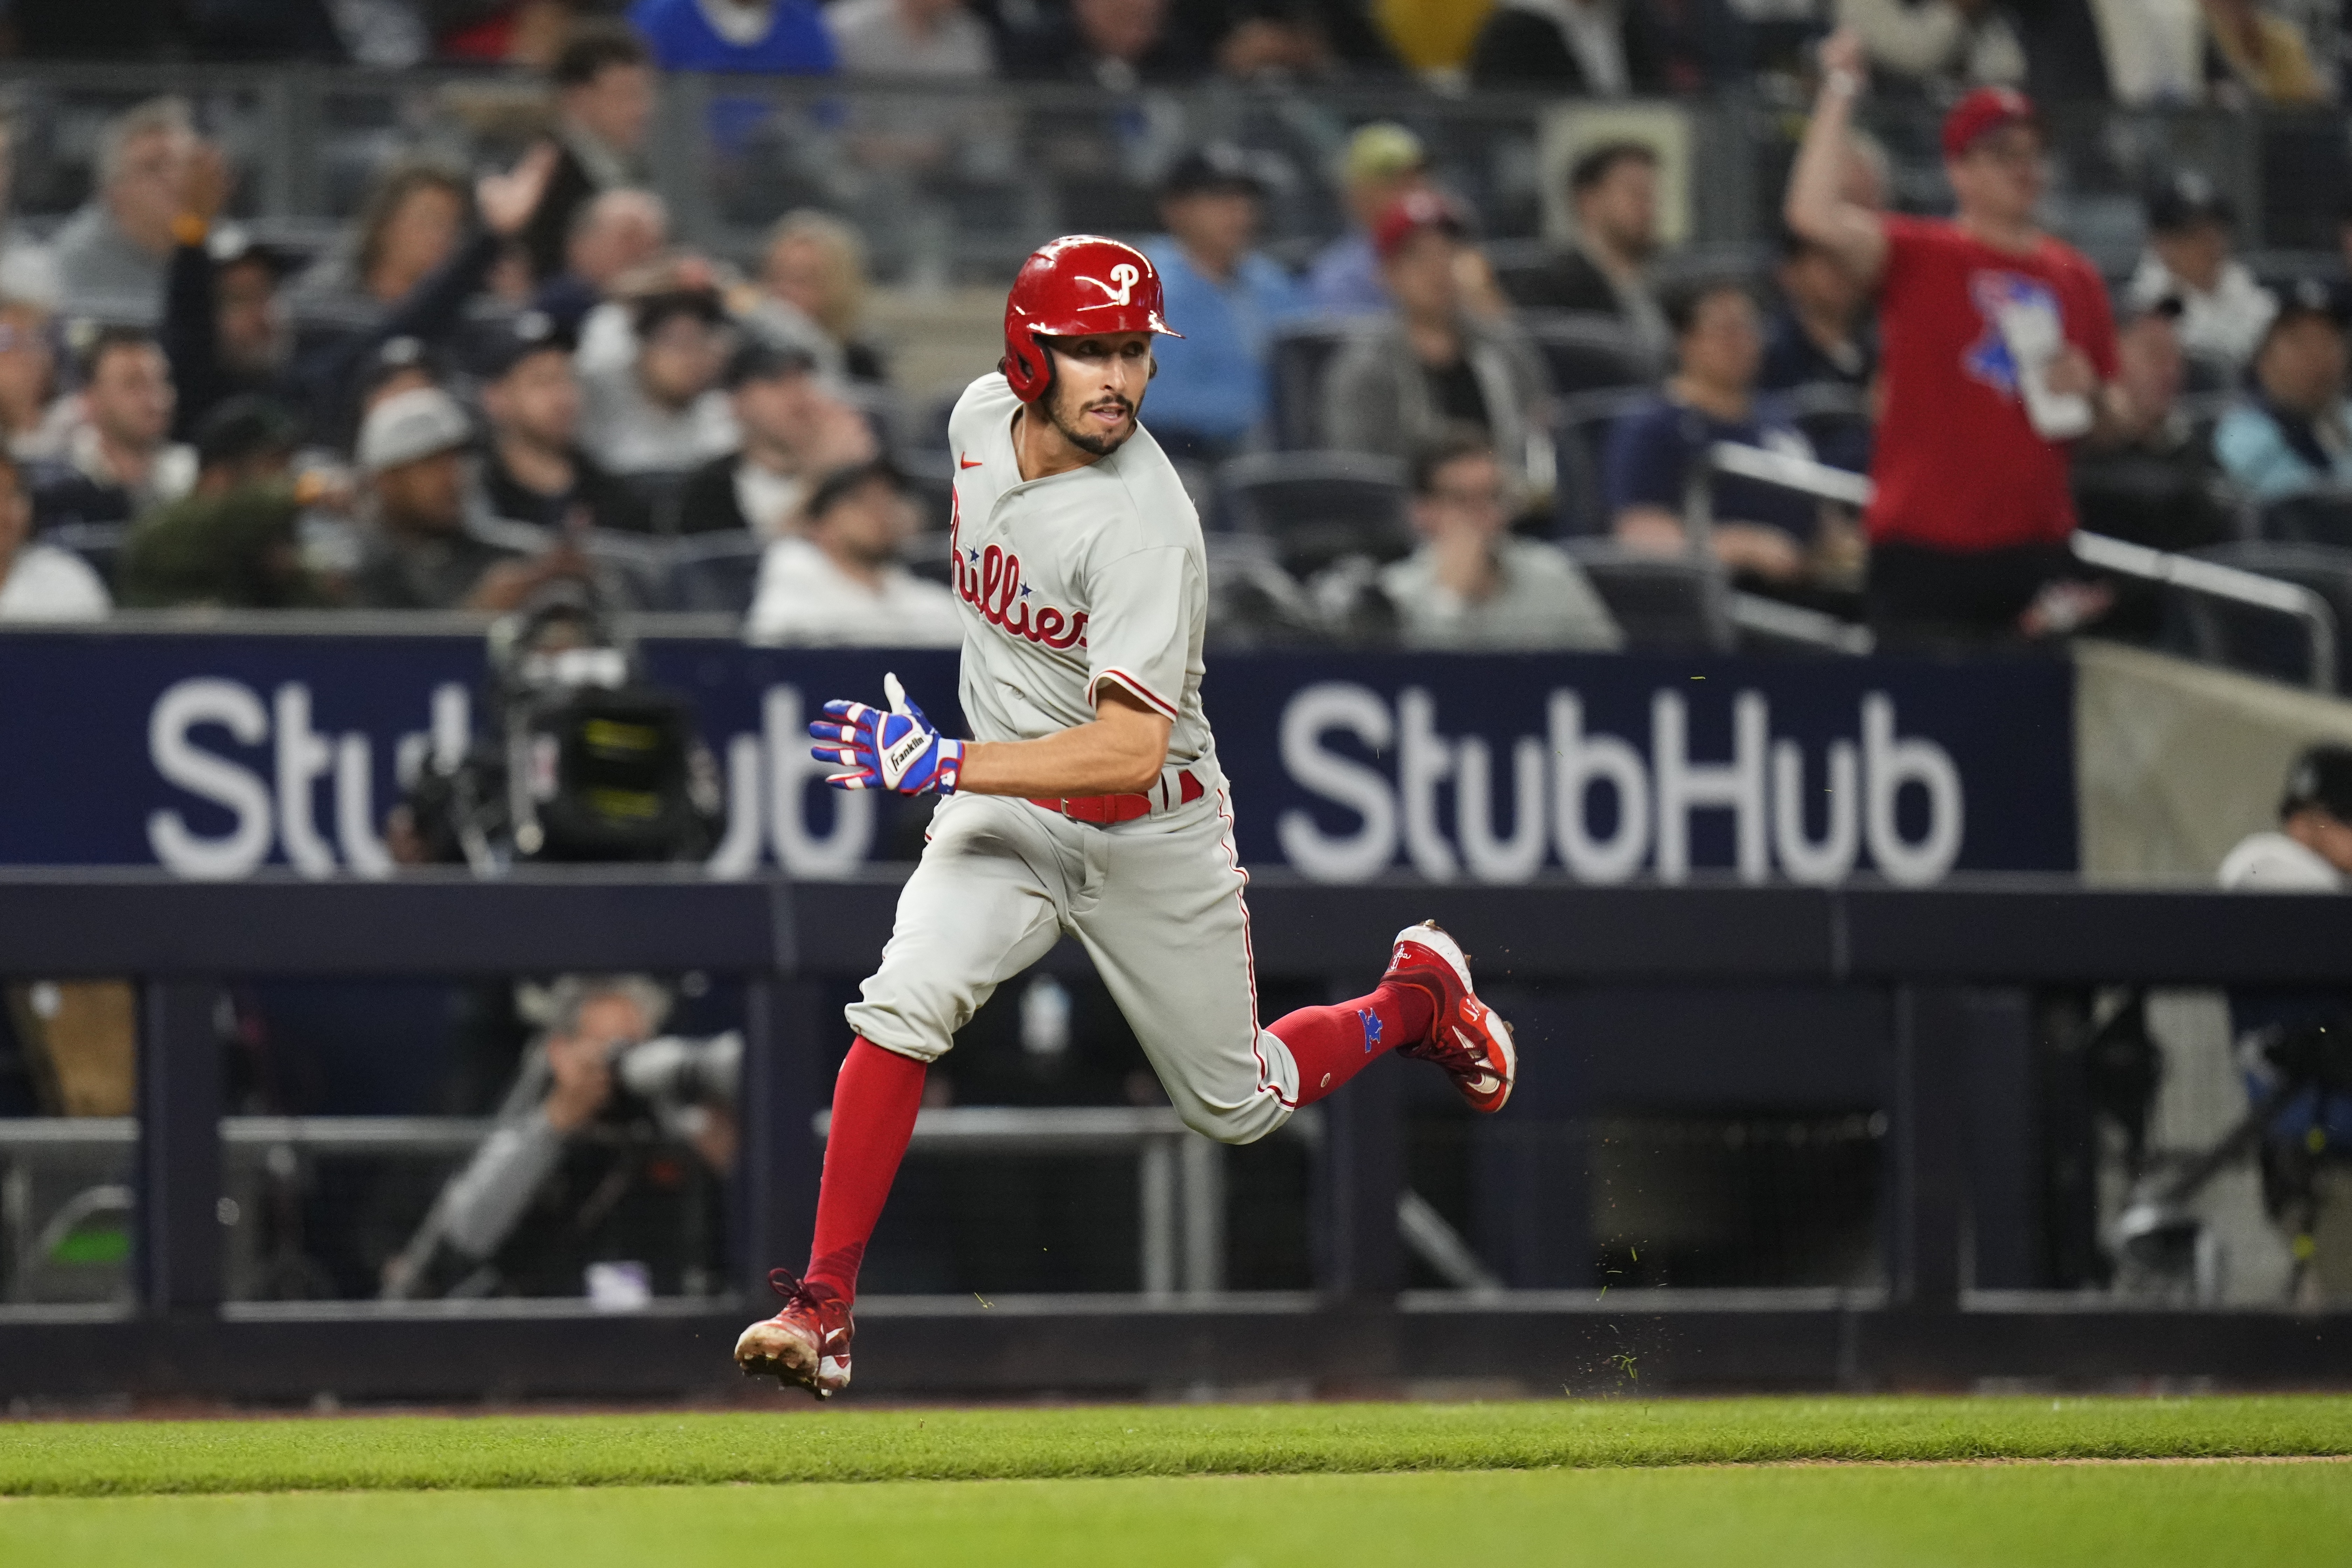 Schwarbomb! Phillies DH Kyle Schwarber sets record for career